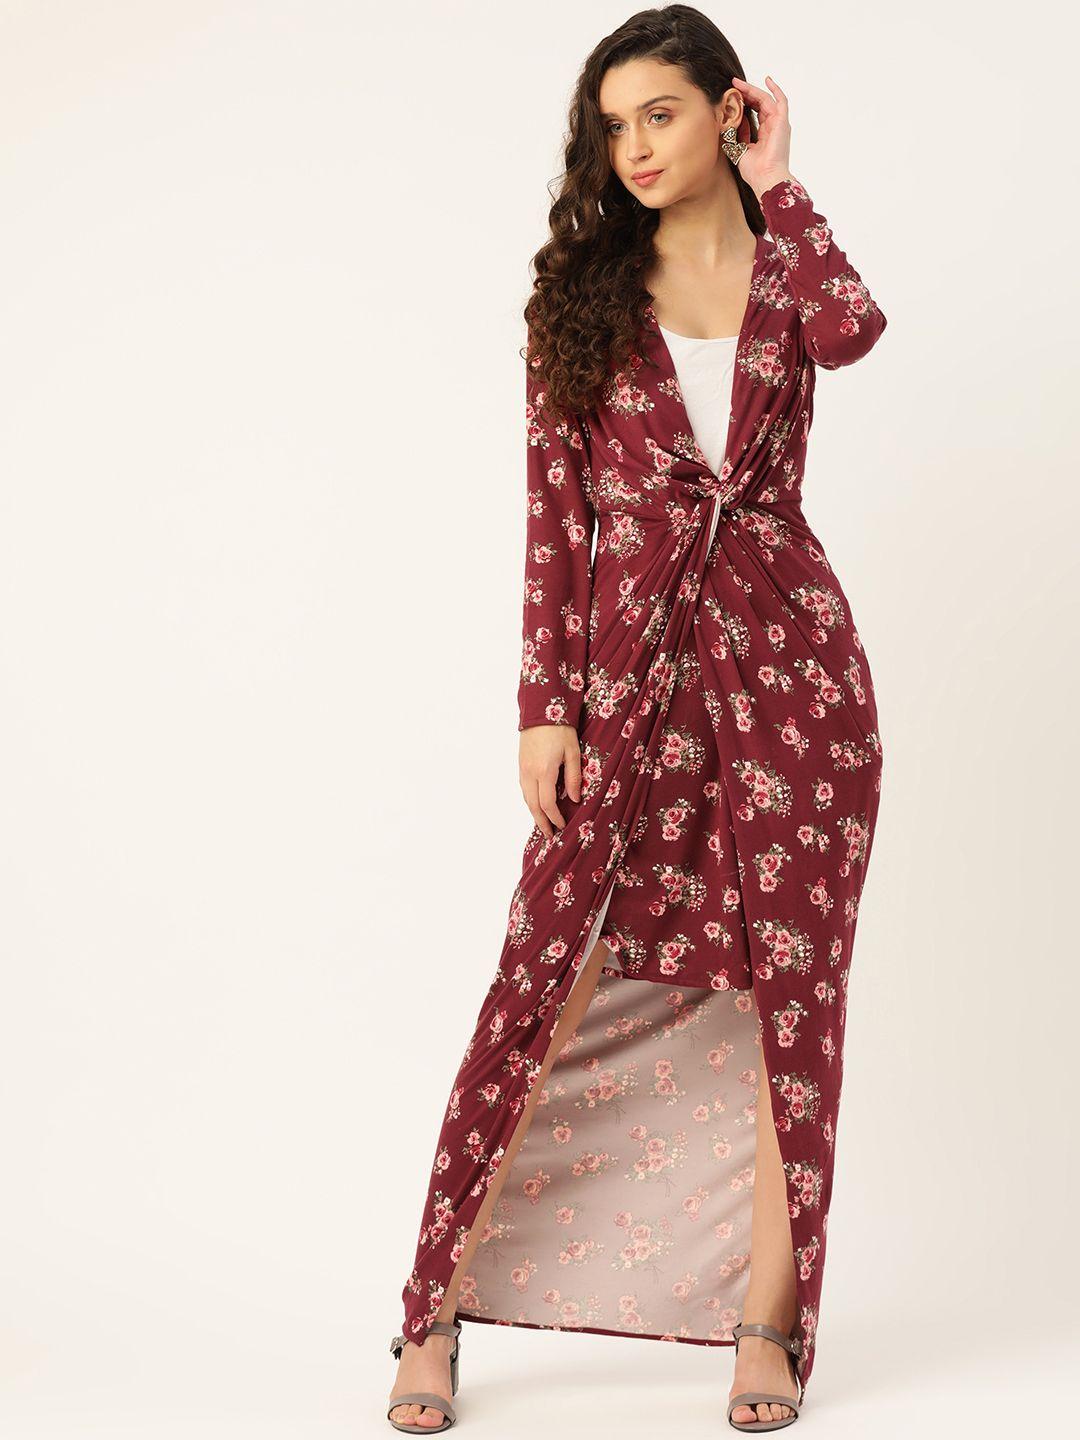 dodo & moa women maroon & pink floral print layered high-low maxi dress